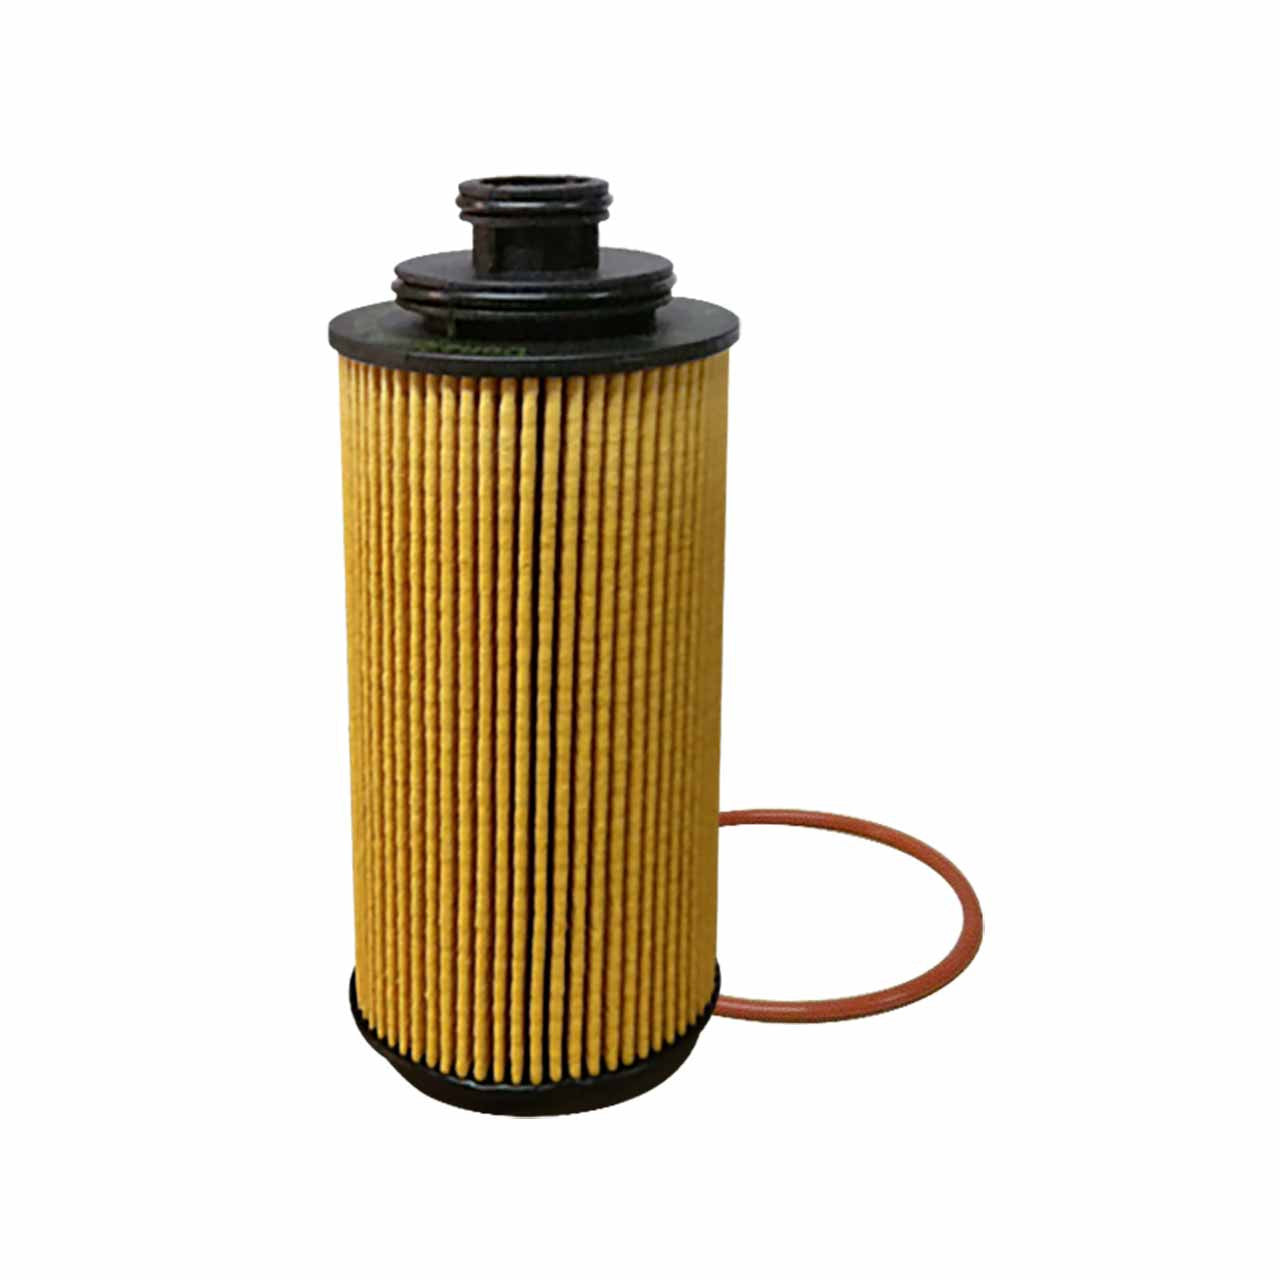 Holden Colorado RG LVN LWH 2.5L 2.8L 2012 - Donaldson Oil Lube Filter Cartridge P506087 for 12636838